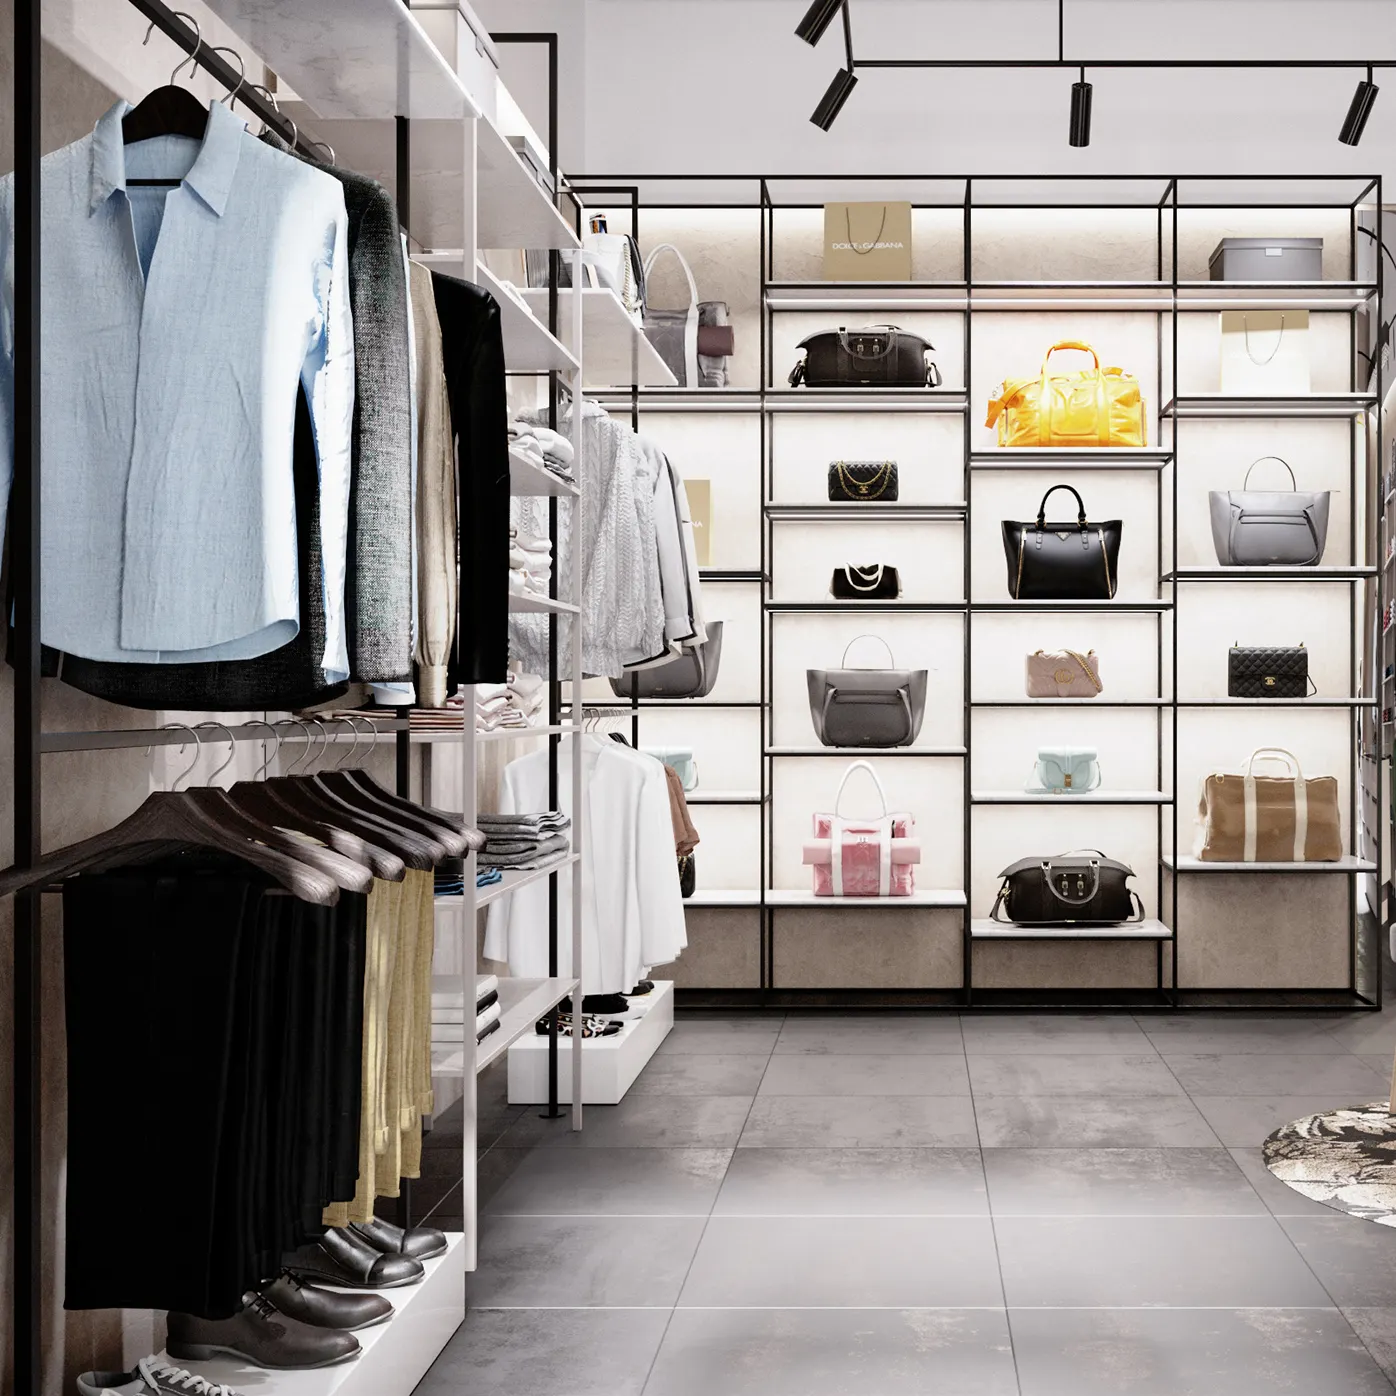 Wooden Luxury Men Clothing Shop Interior Design,Cheap Clothing Store Display Furniture